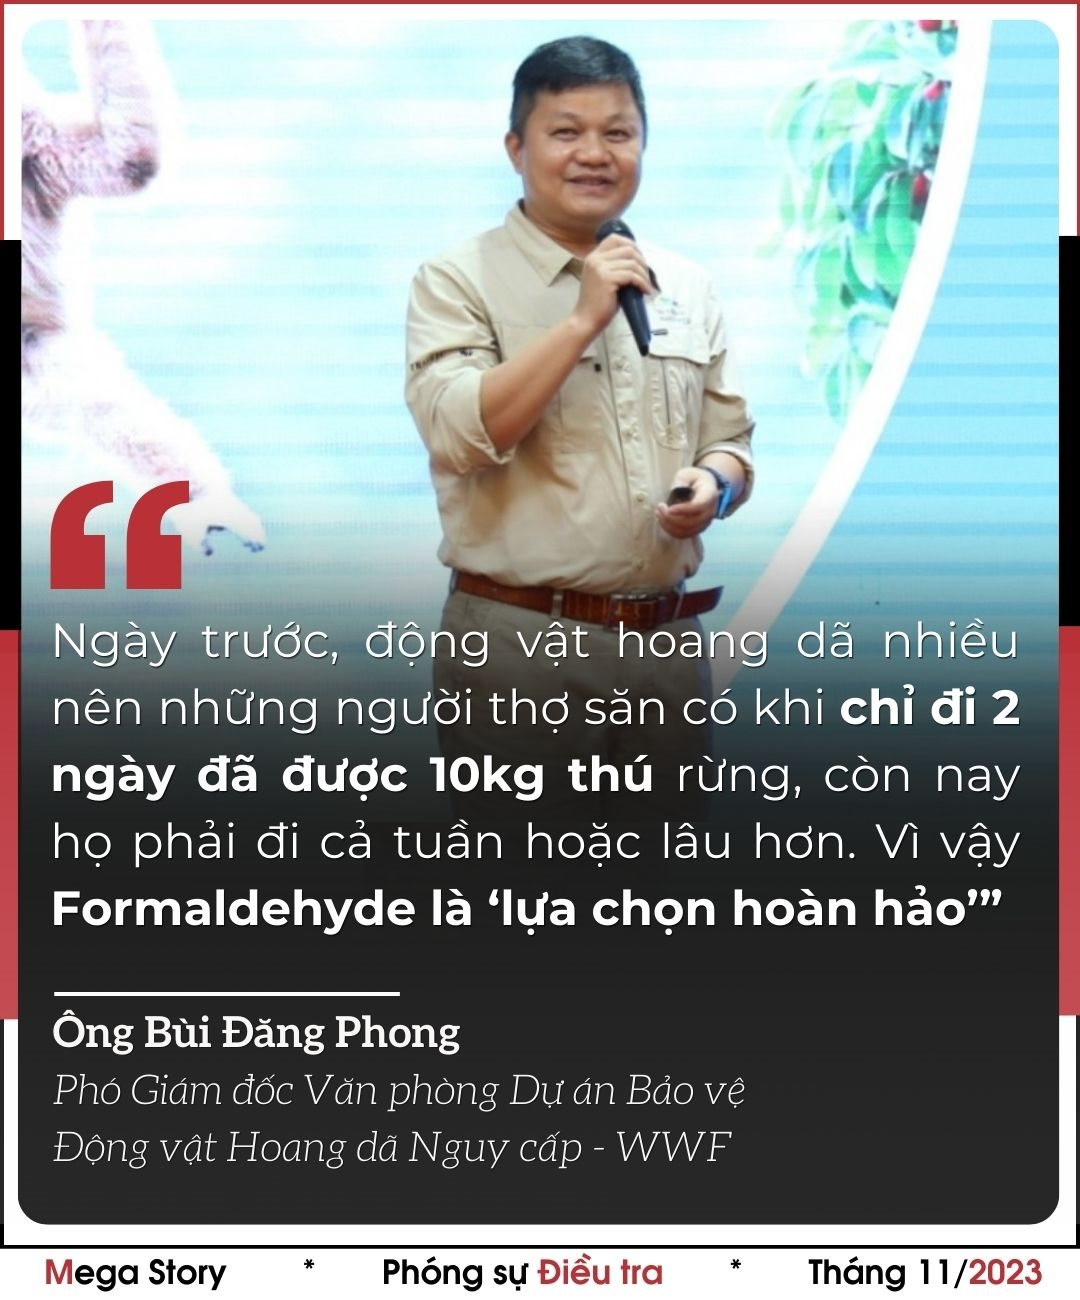 quotephong.jpg